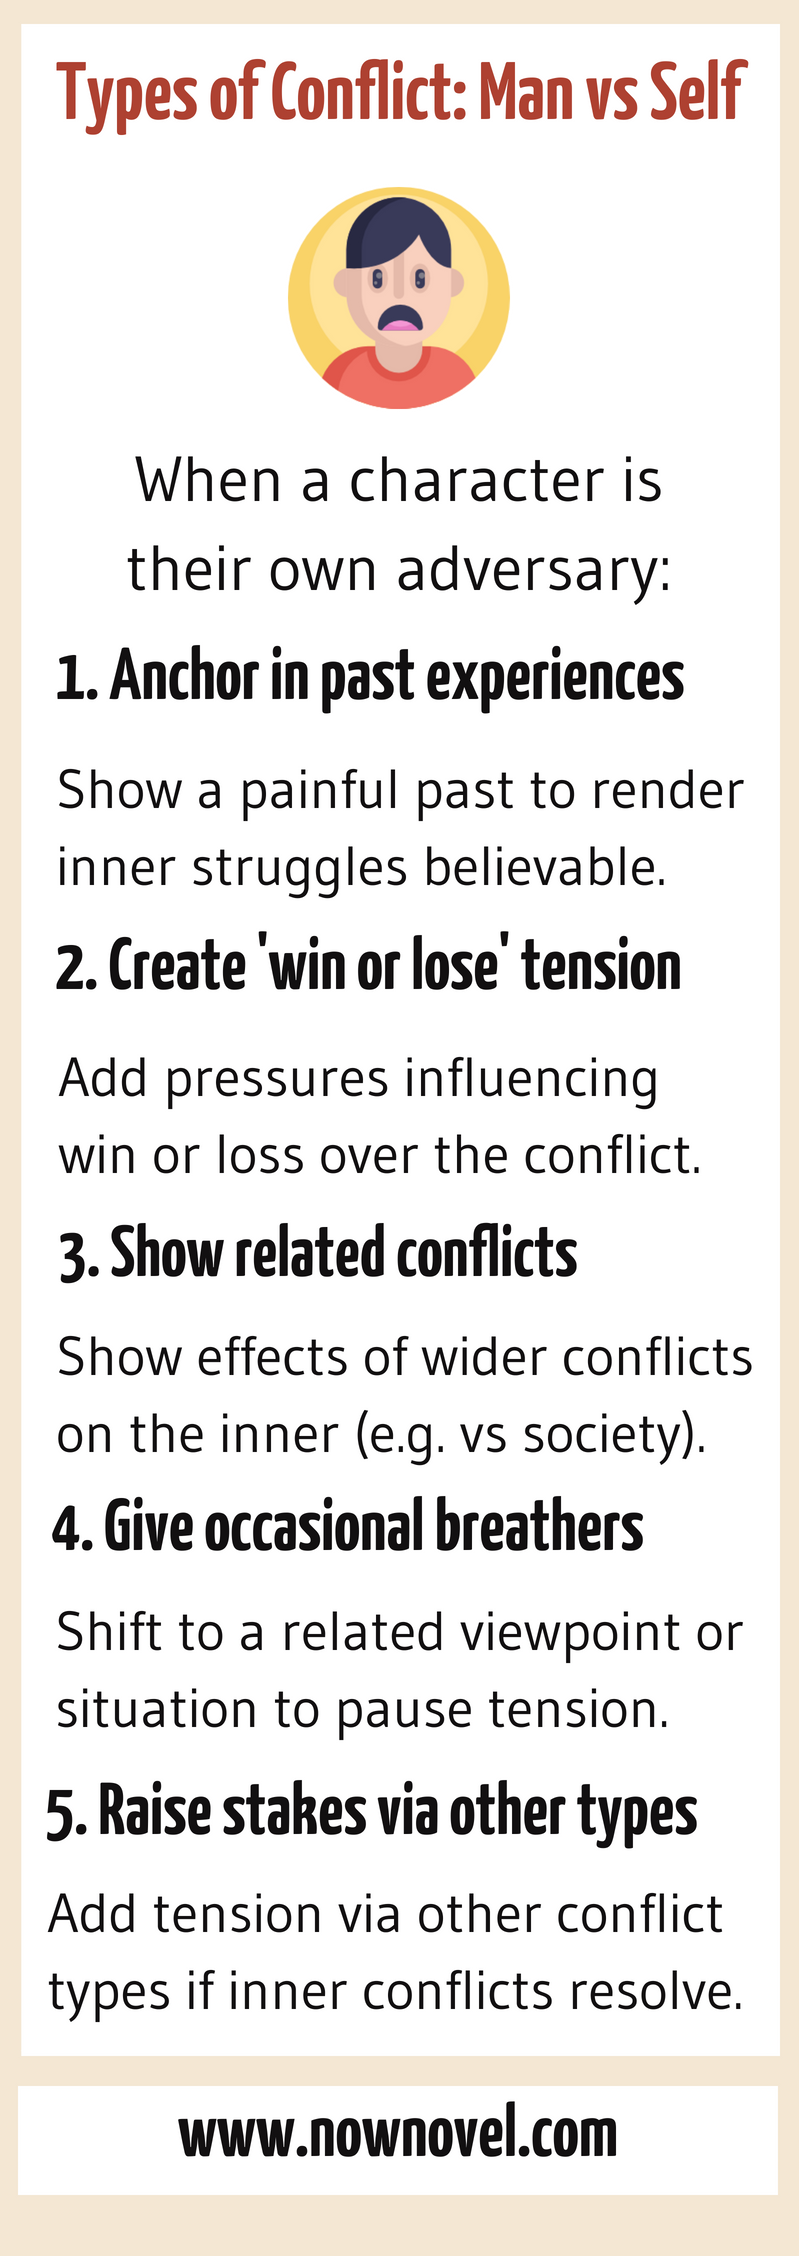 6 Conflict Types in Fiction: Man vs Self